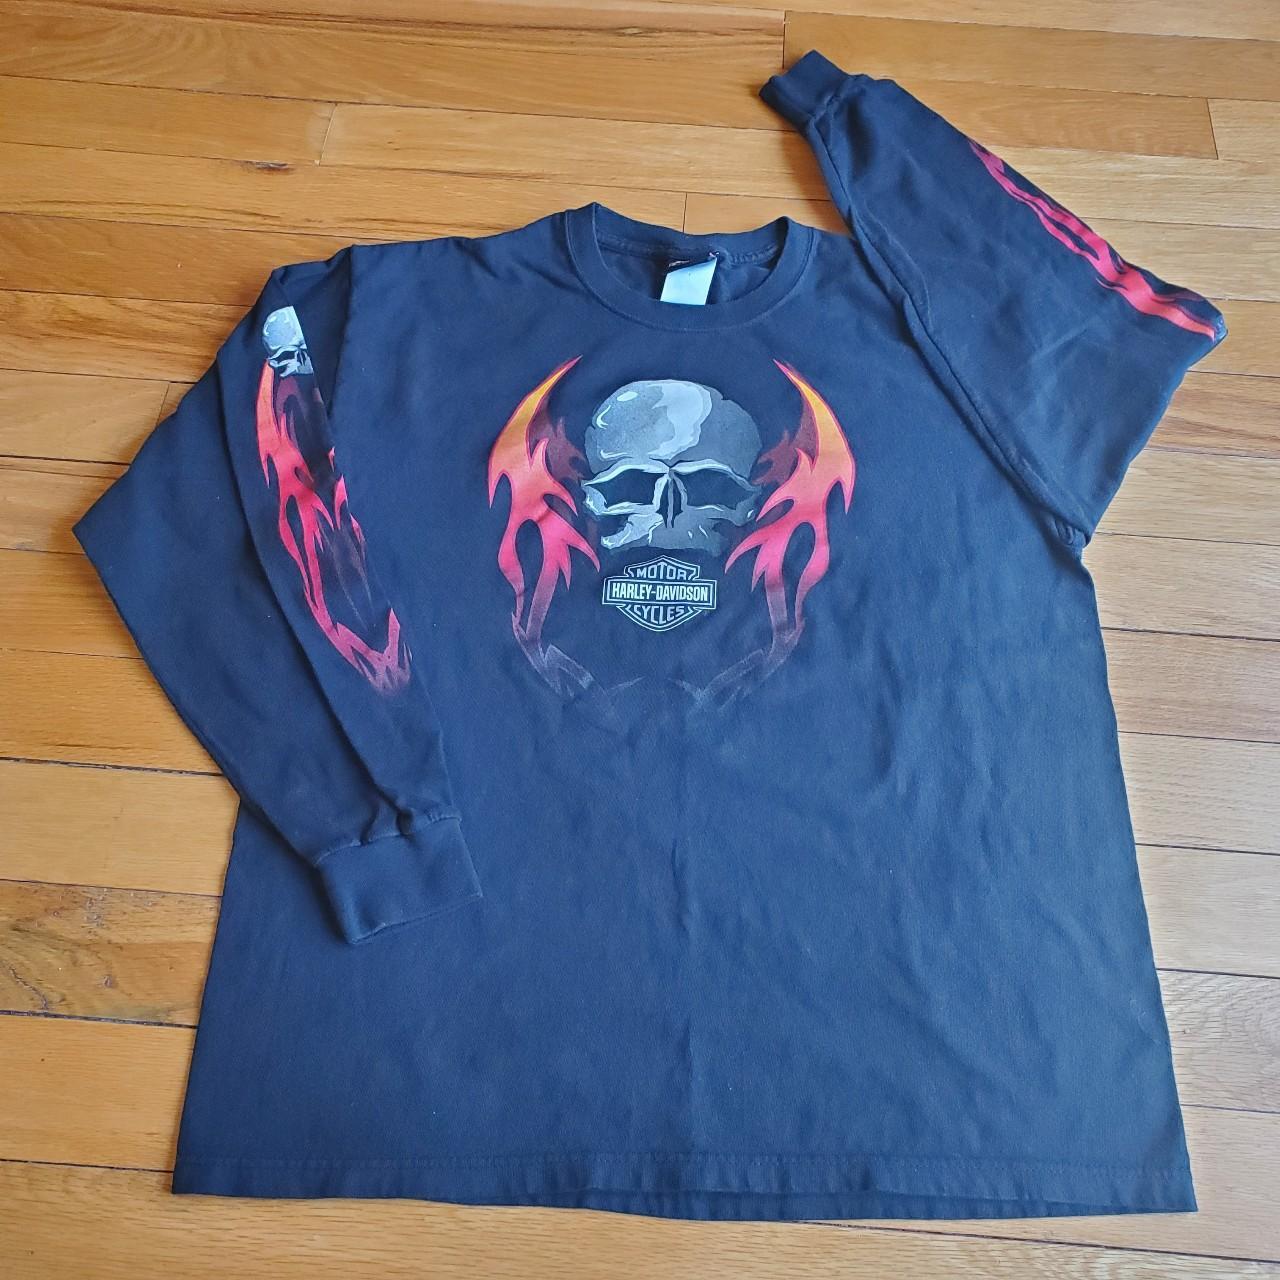 item listed by thriftedfitmn